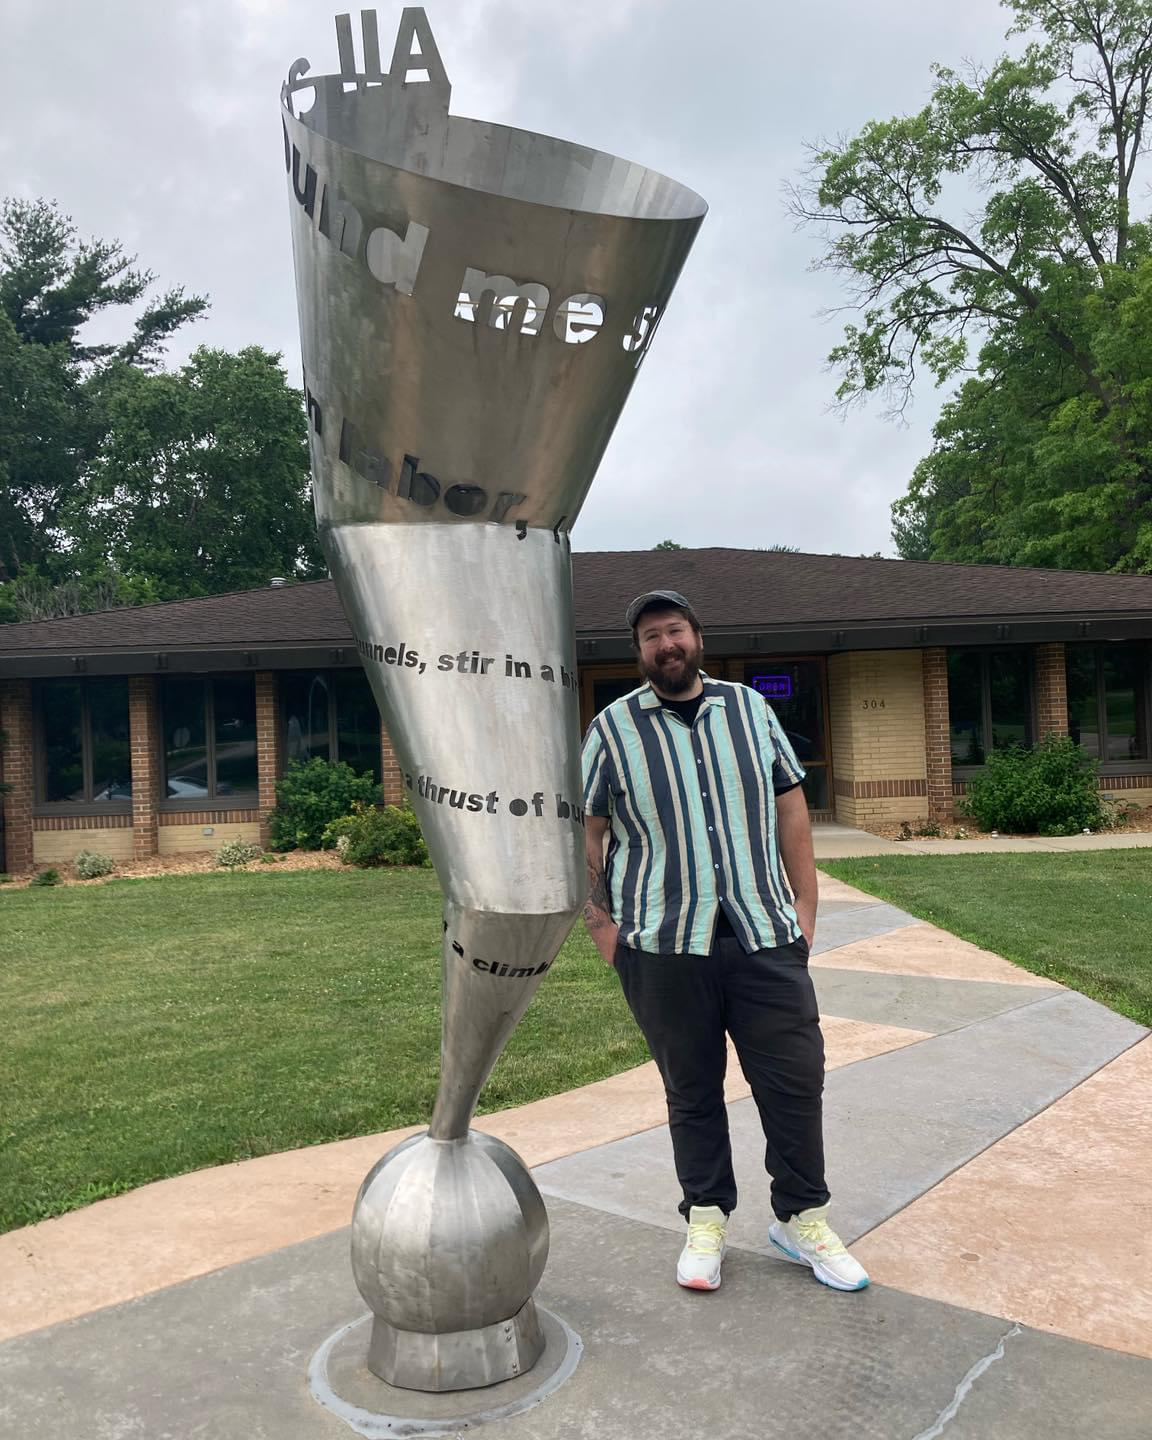 Seth Thill standing outside of the Hearst Center in Cedar Falls Iowa, next to a large (10-15 feet tall) metal statue of a horn. Seth is wearing a vertically striped camp shirt with multiple shades of blue, grey pants, a baseball cap, and white Nikes. 